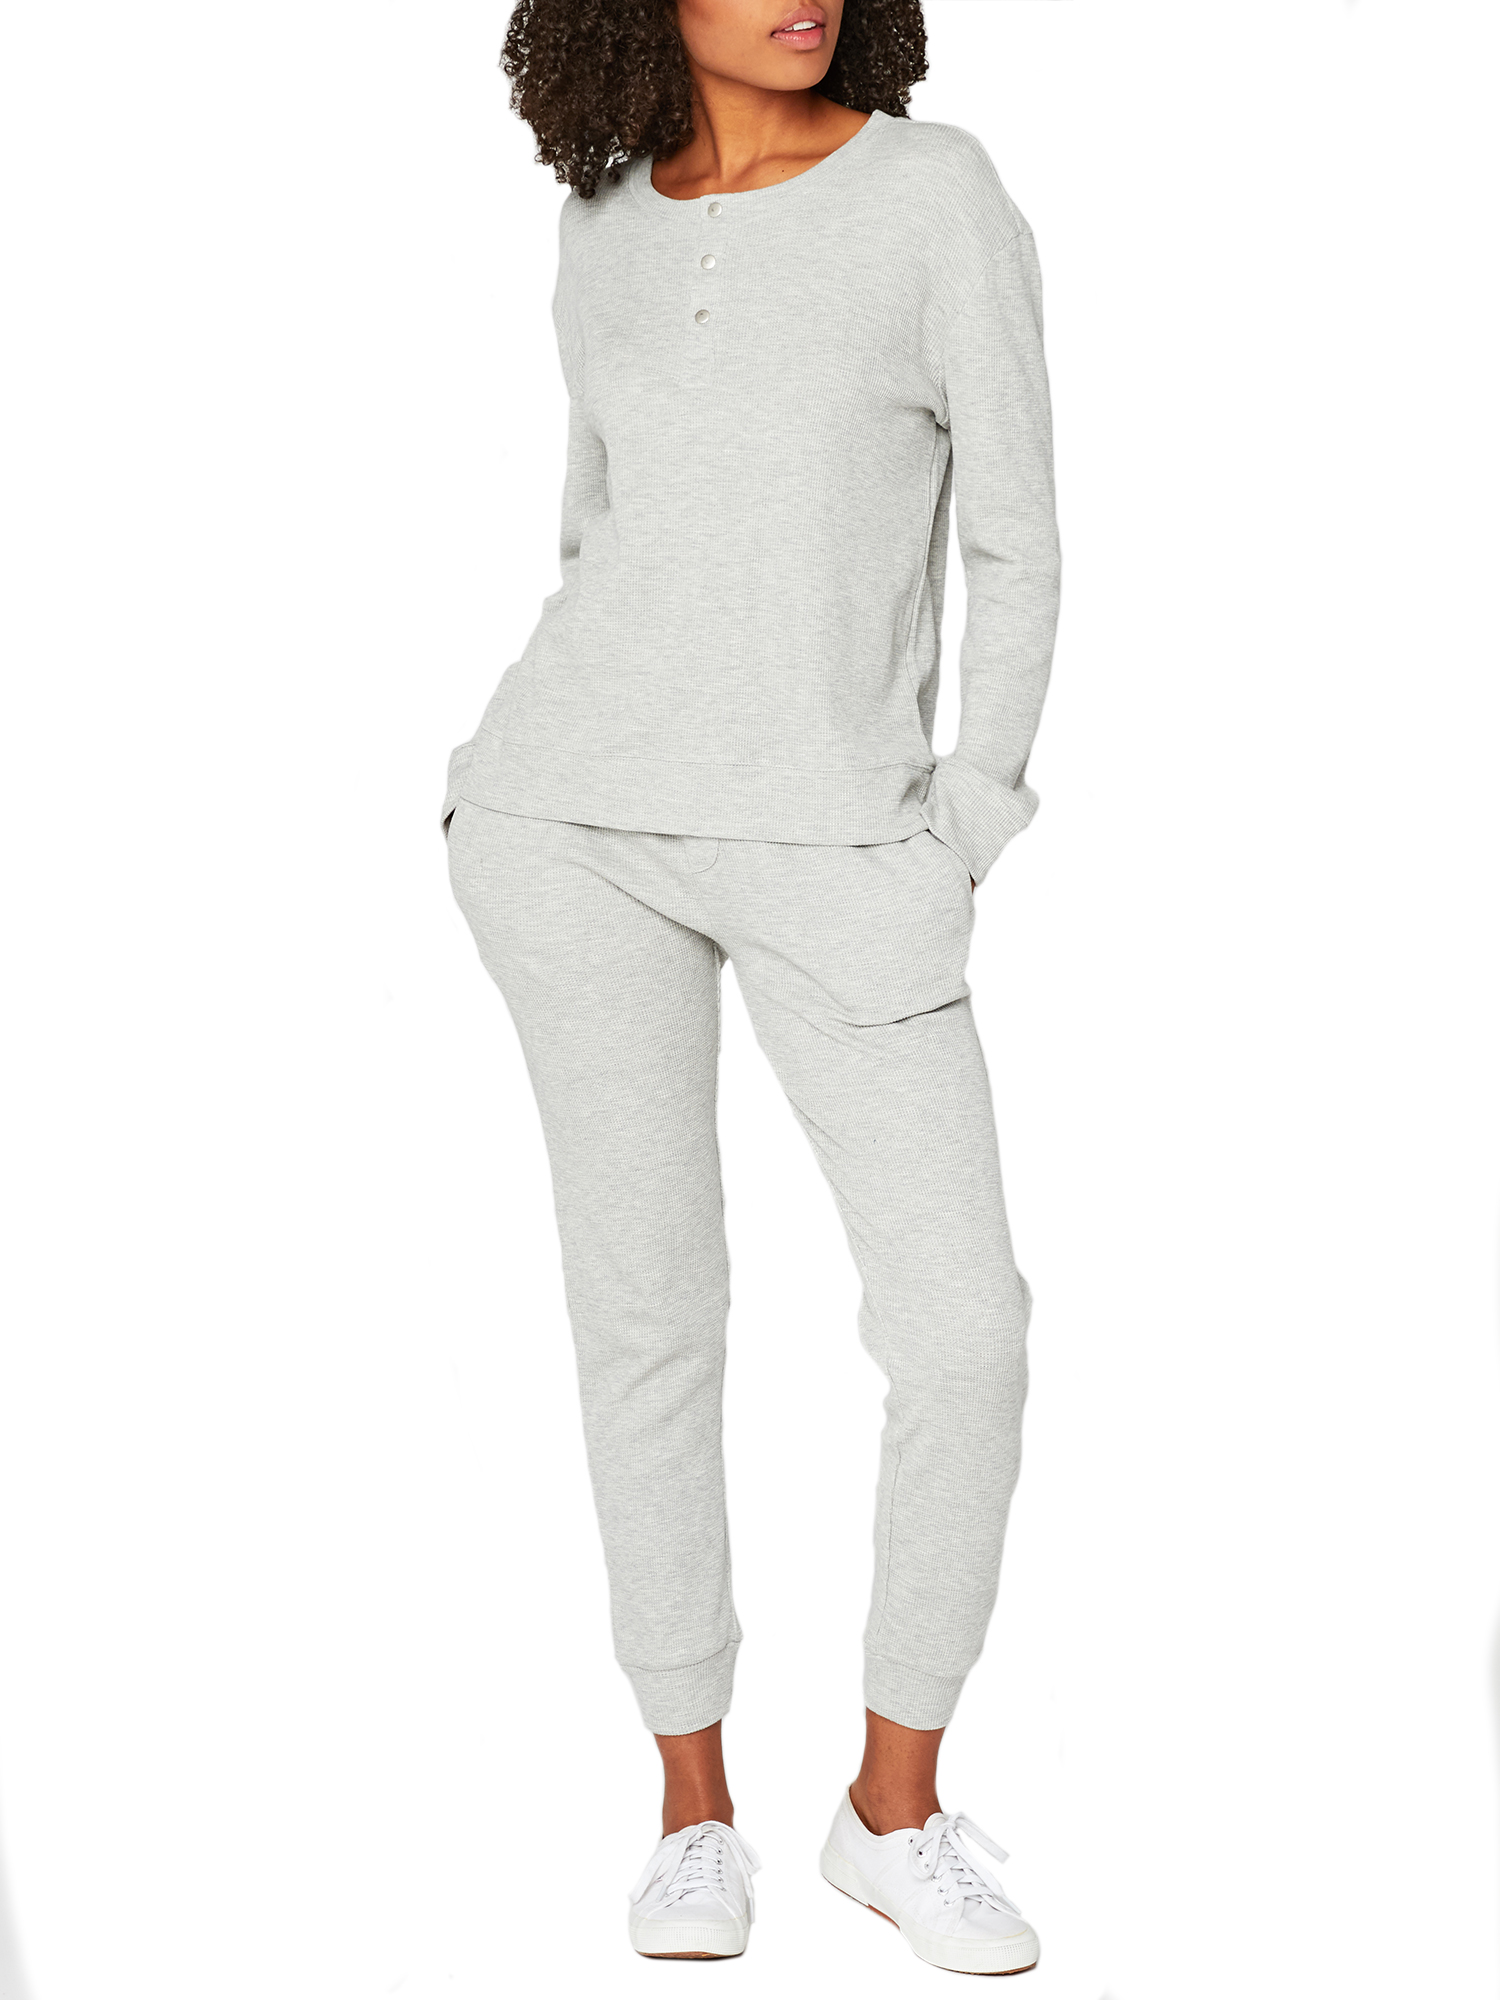 Threads 4 Thought Women's Athleisure Thermal Jogger - image 3 of 3